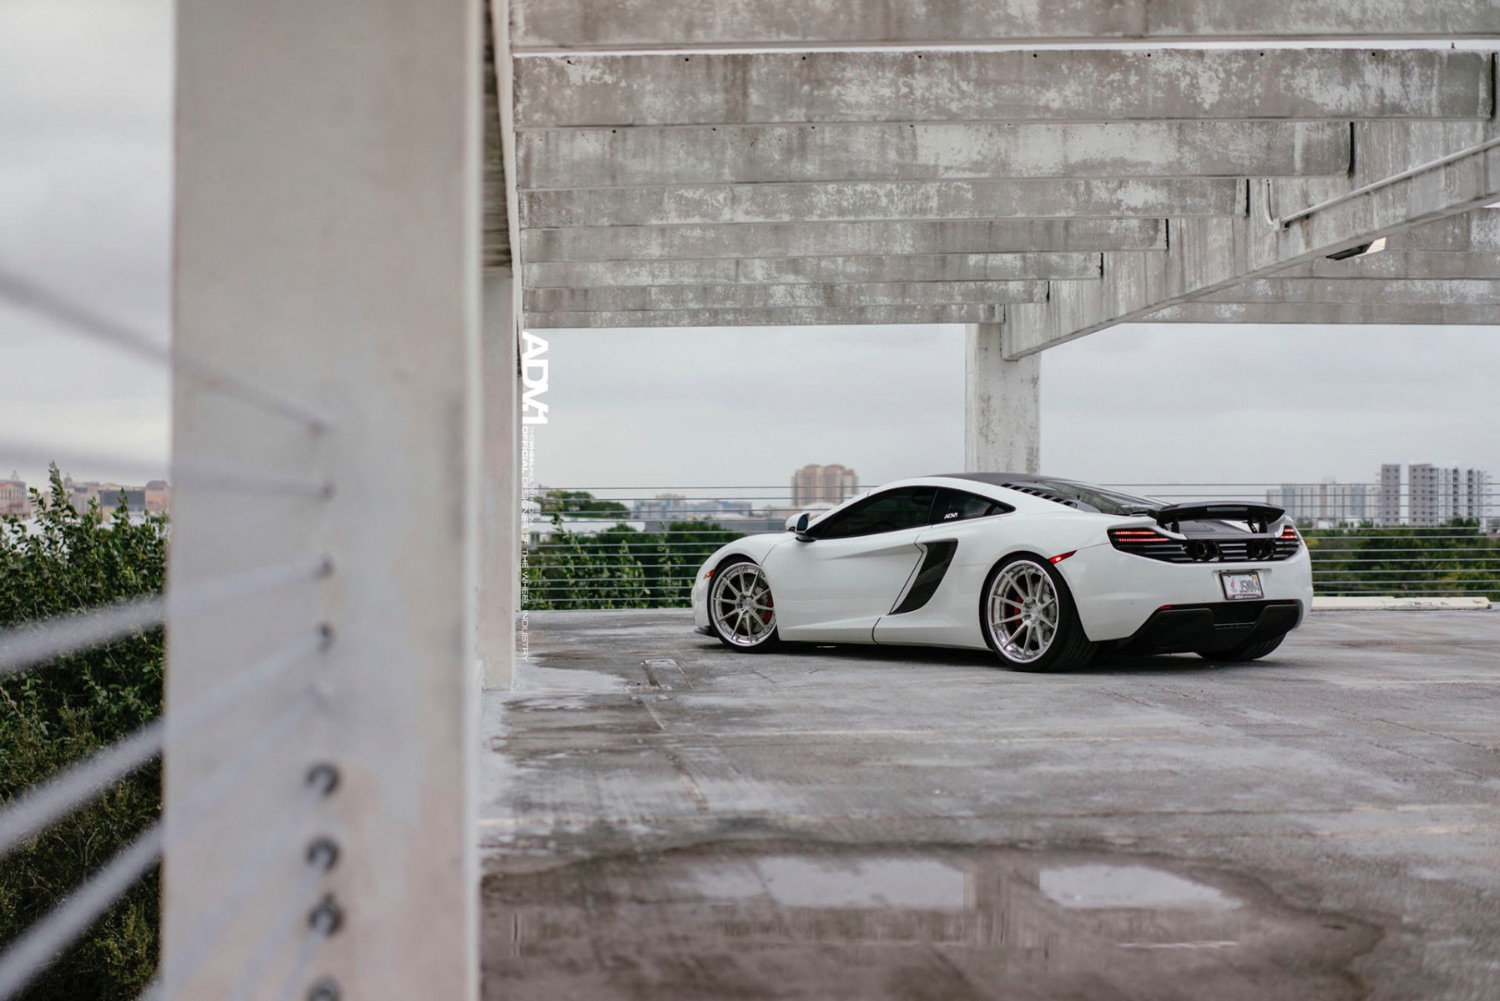 adv1-wheels-mclaren-mp412c-white-forged-custom-racing-modified-lowered-stance-rims-k